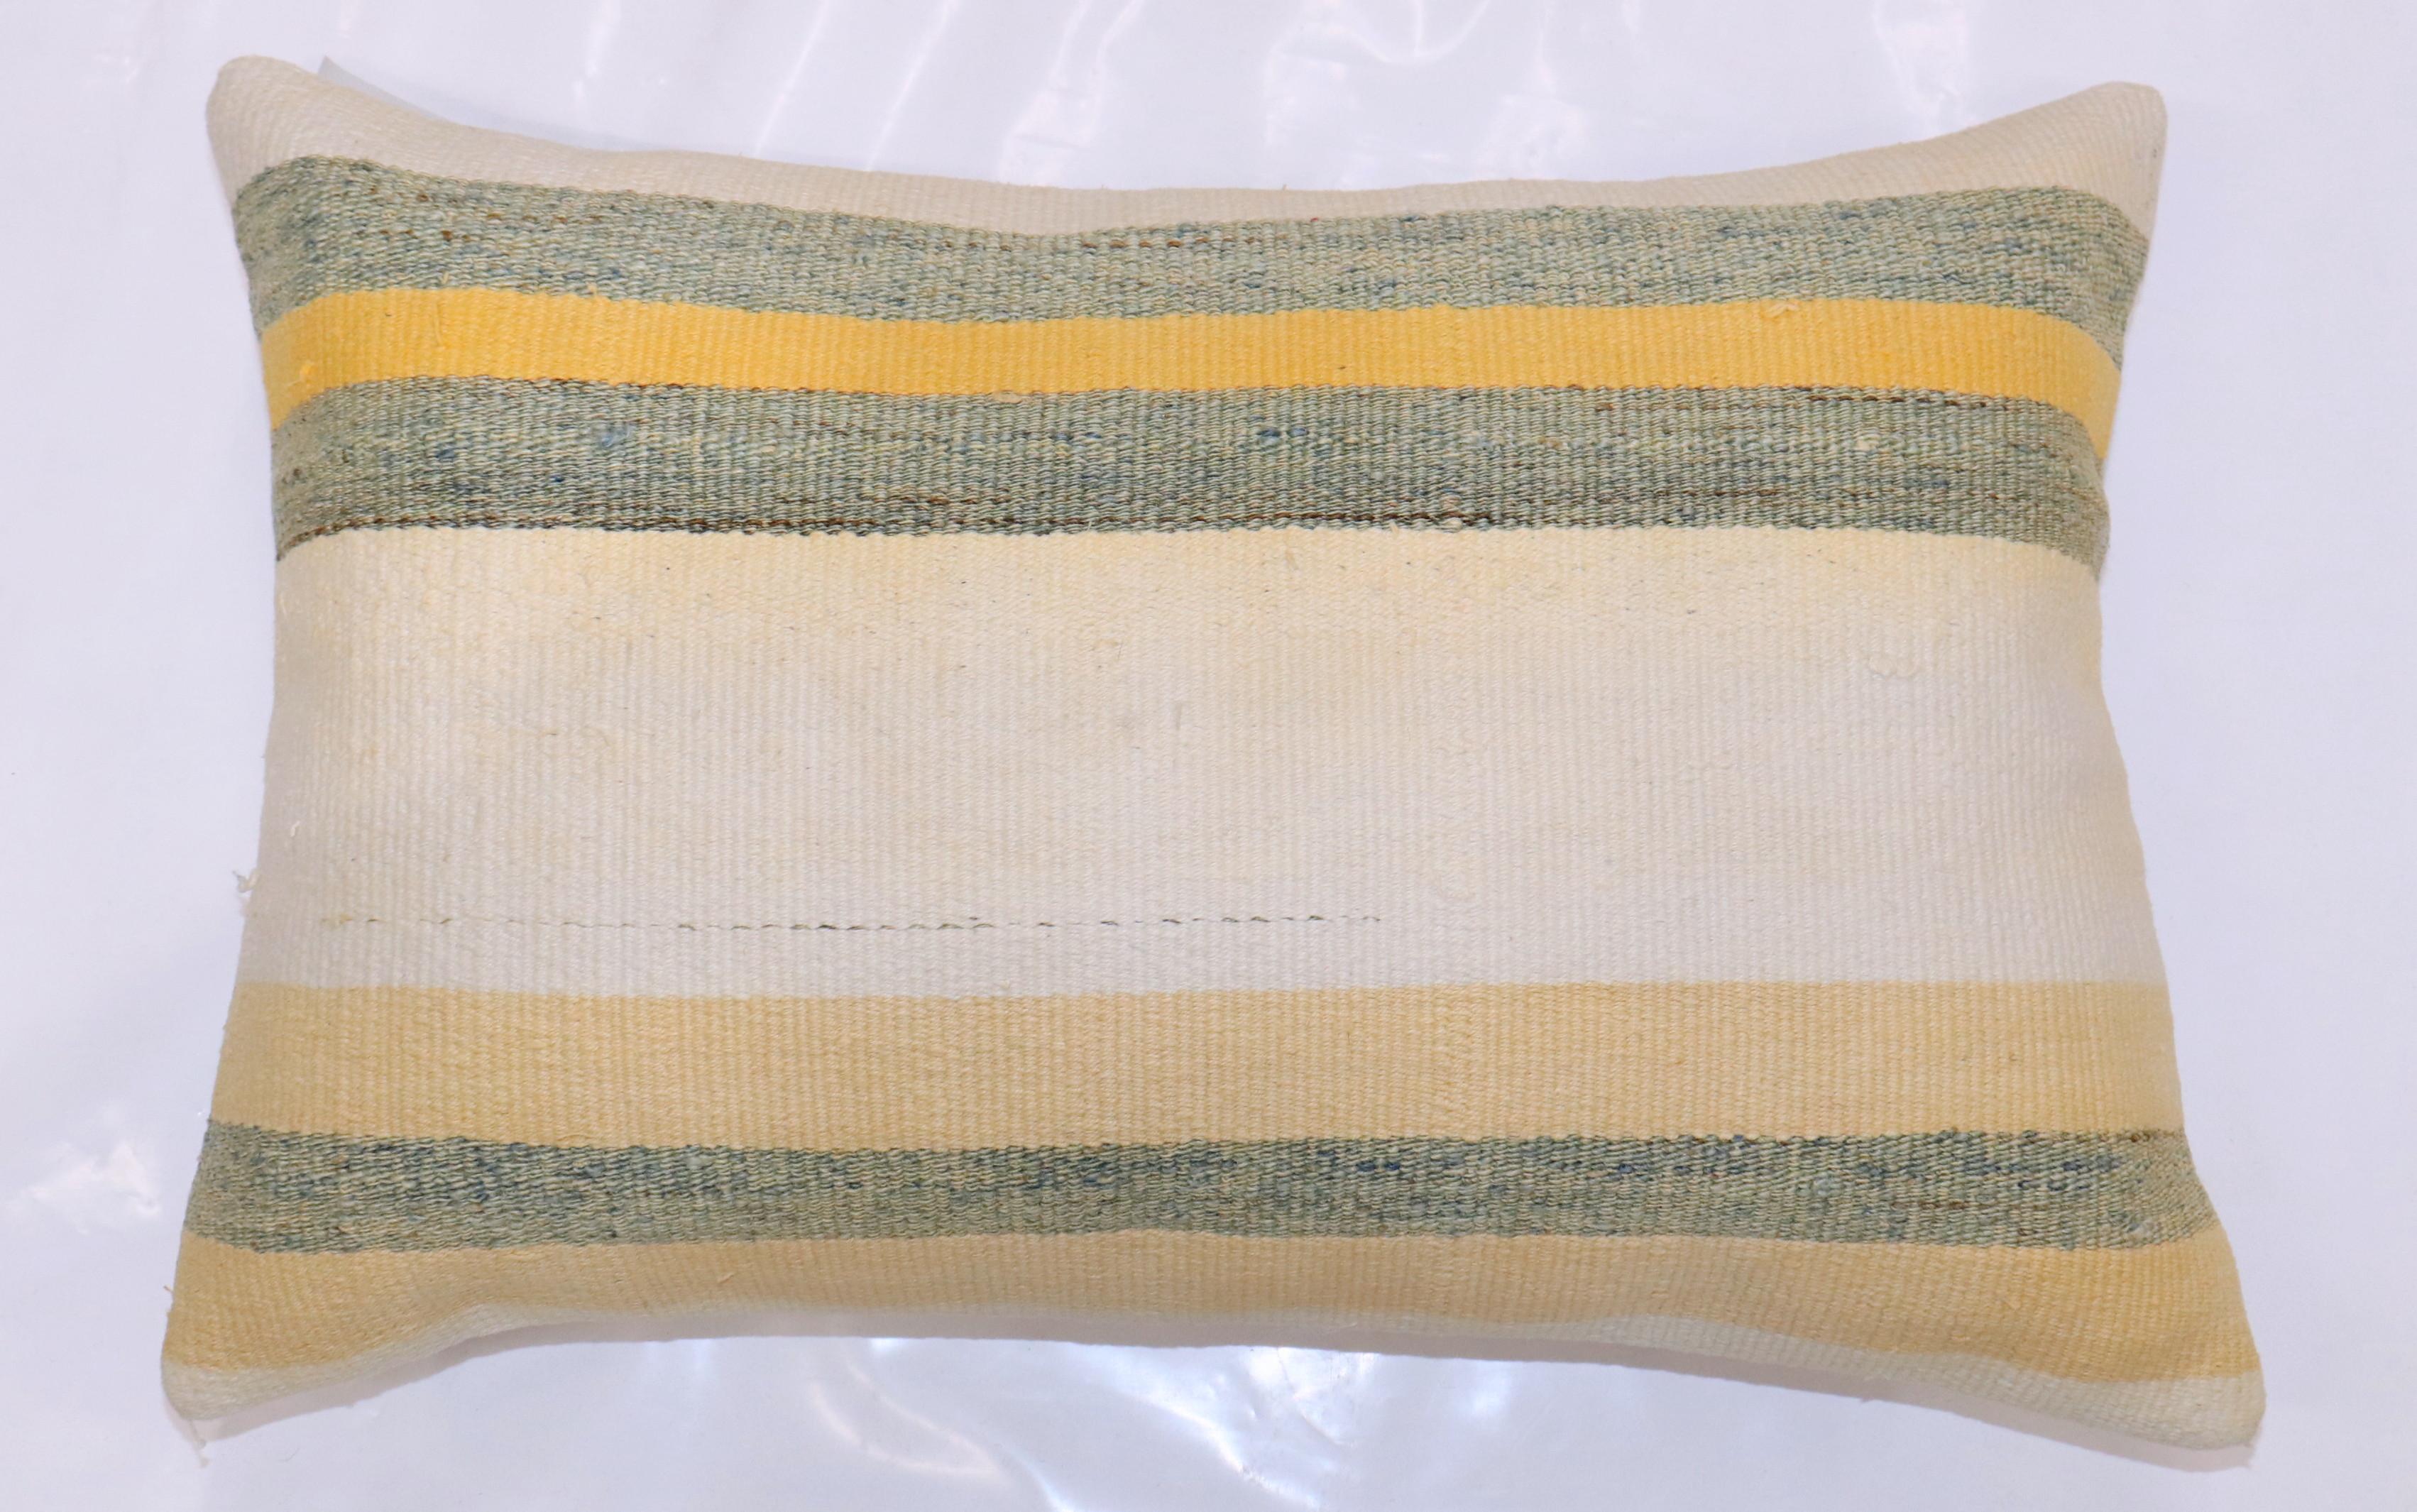 Pillow made from modern Turkish Kilim with a striped motif.

Measures: 16